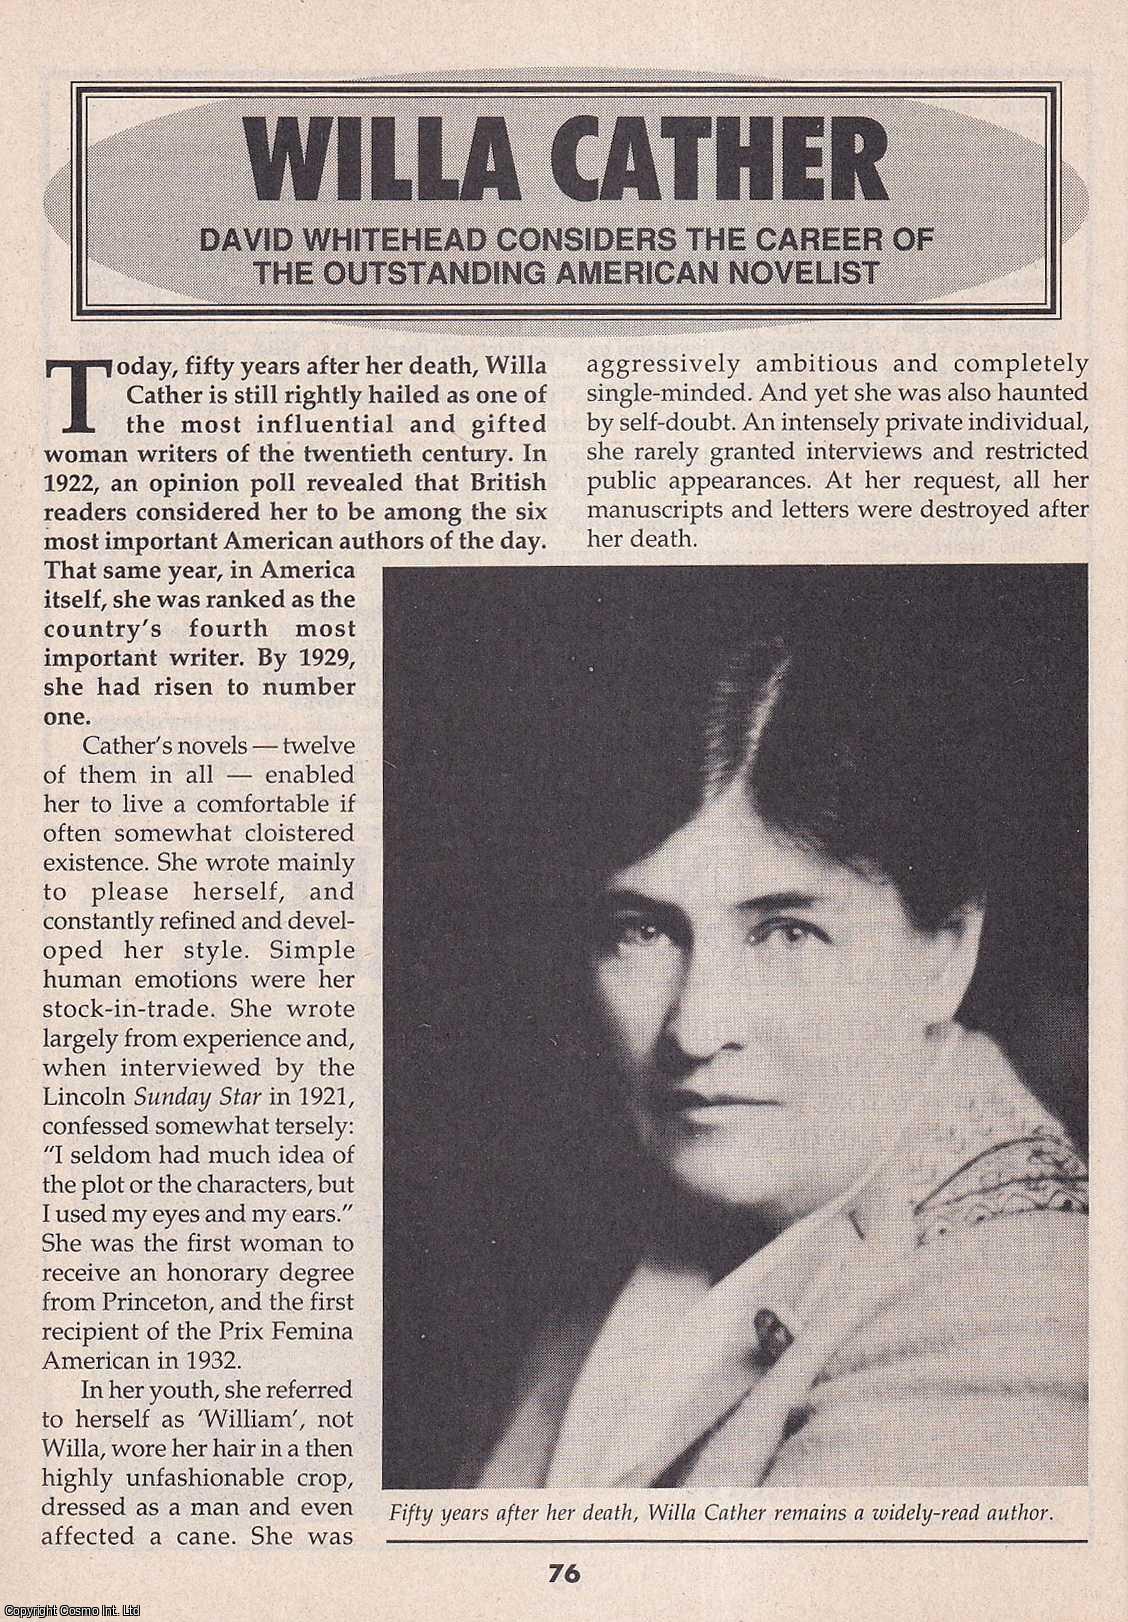 David Whitehead - Willa Cather. Considering The Career of The Outstanding American Novelist. This is an original article separated from an issue of The Book & Magazine Collector publication.